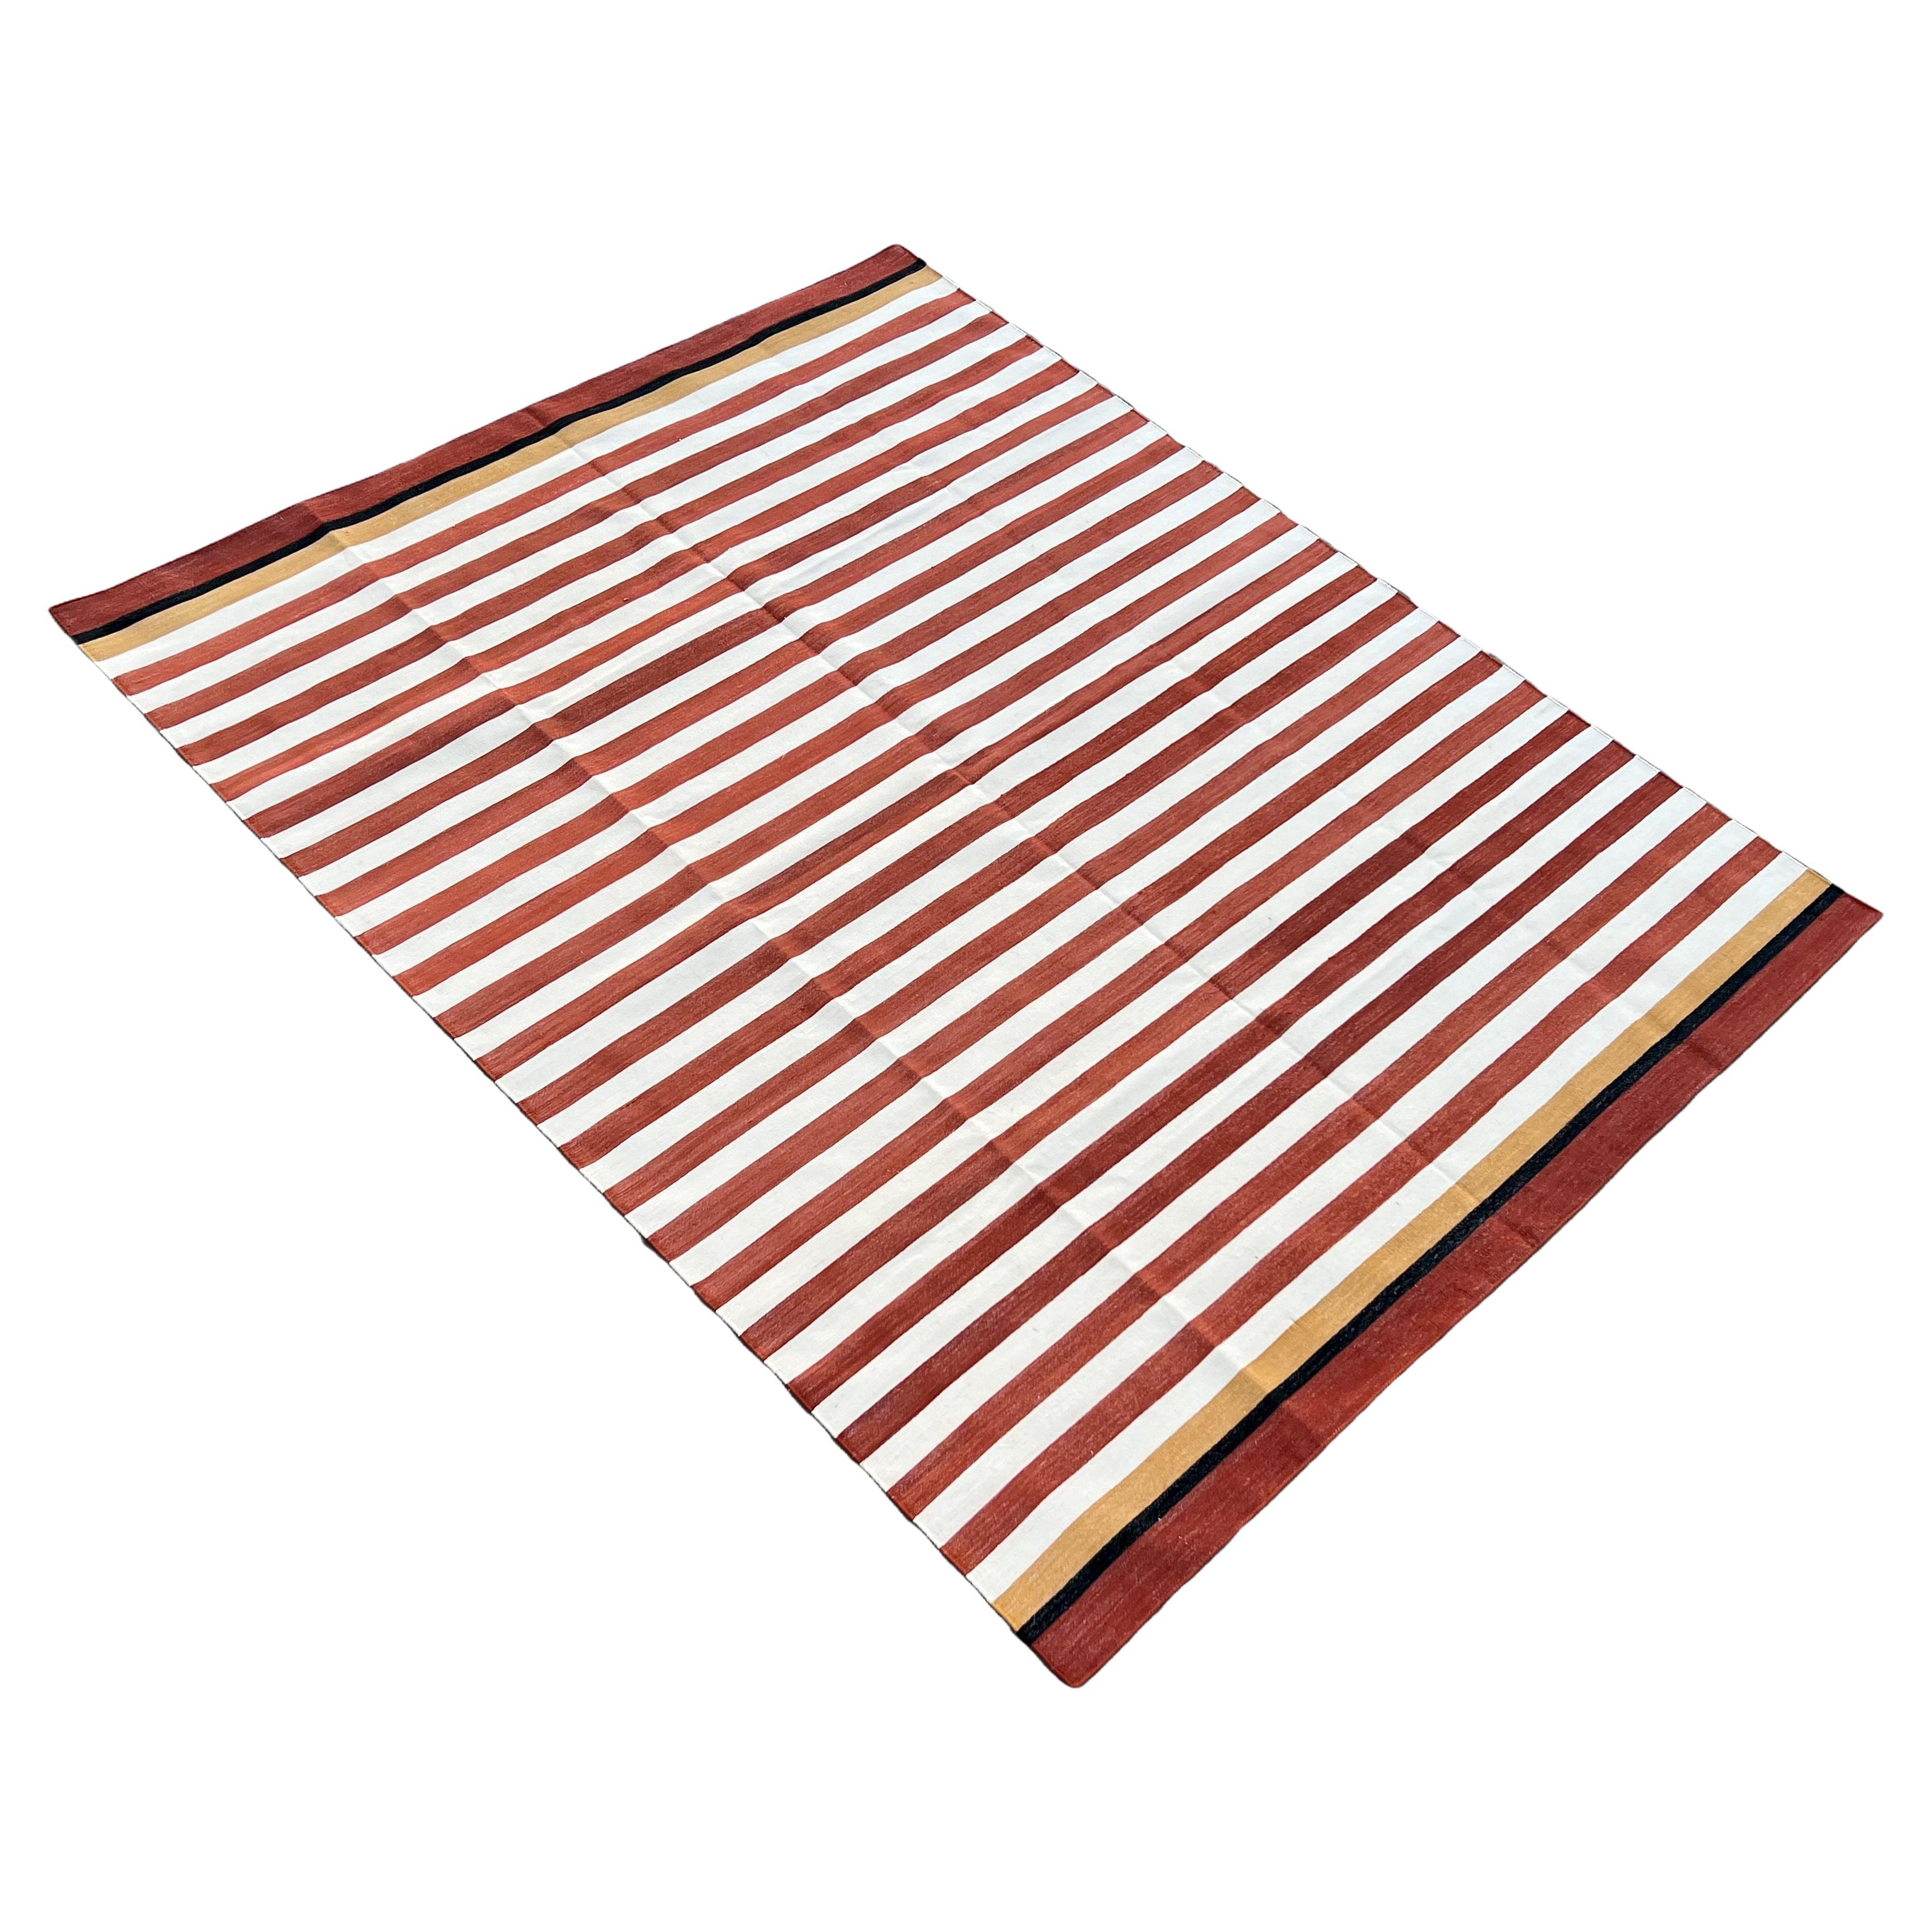 Handmade Cotton Area Flat Weave Rug, 6x9 Red And White Stripe Indian Dhurrie Rug For Sale